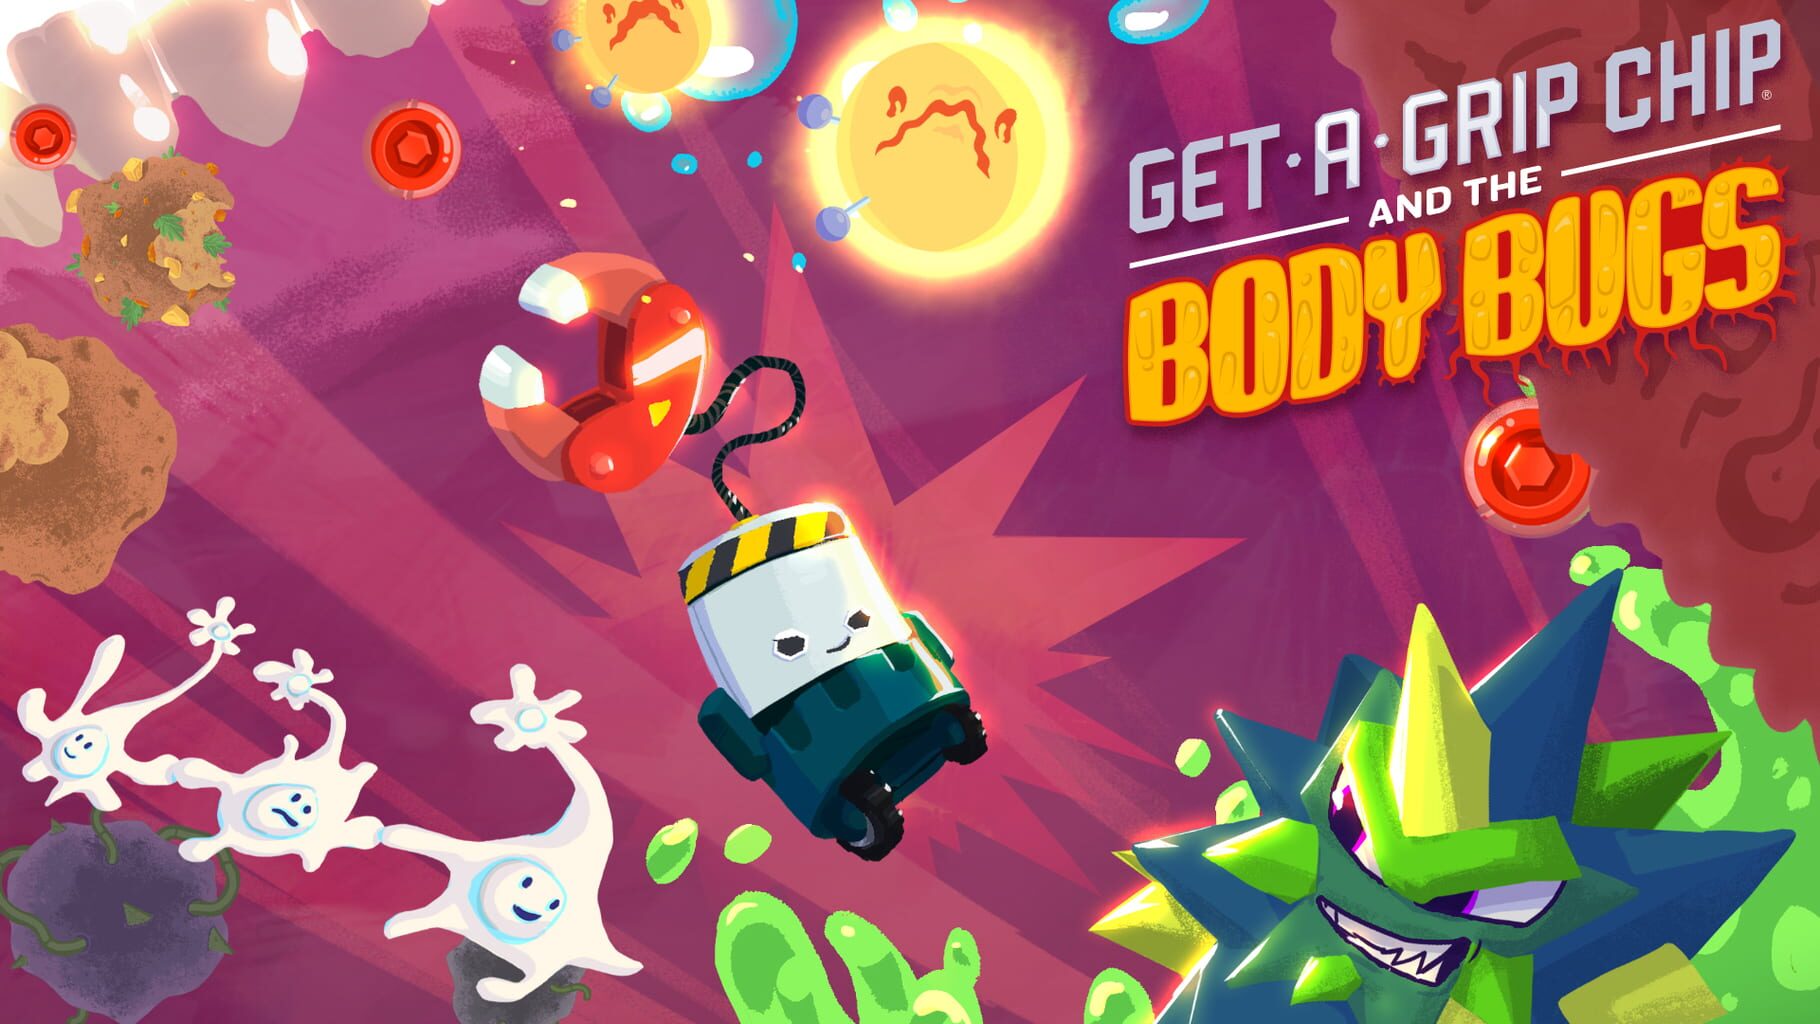 Get-A-Grip Chip and the Body Bugs artwork